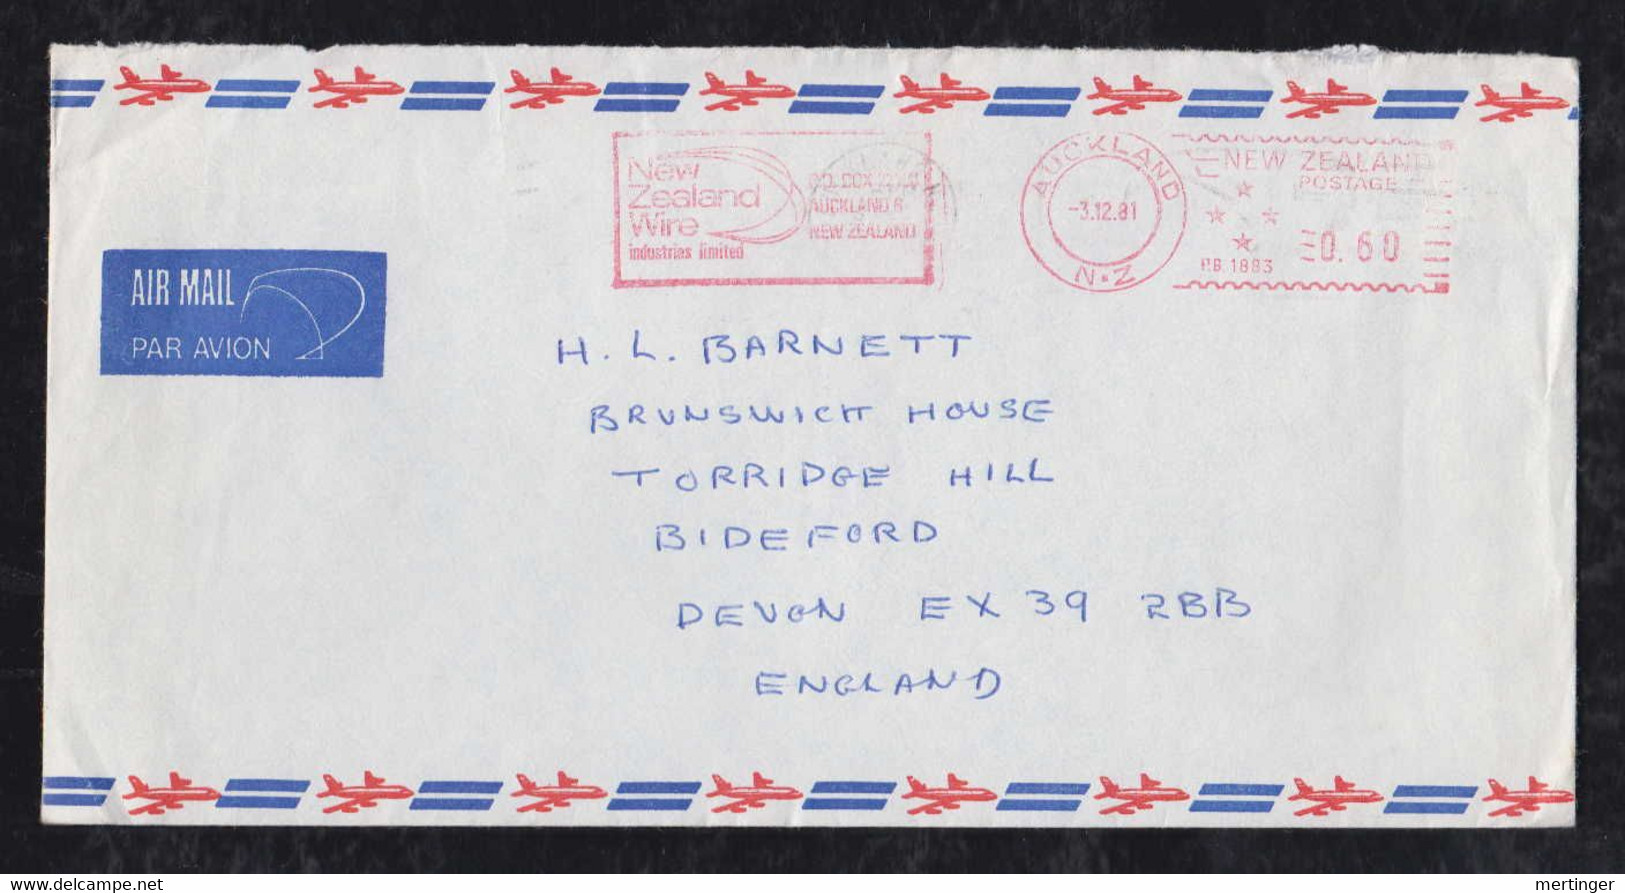 New Zealand 1981 Meter Airmail Cover $0,60 Auckland To Bideford England New Zealand Wire Advertising - Storia Postale